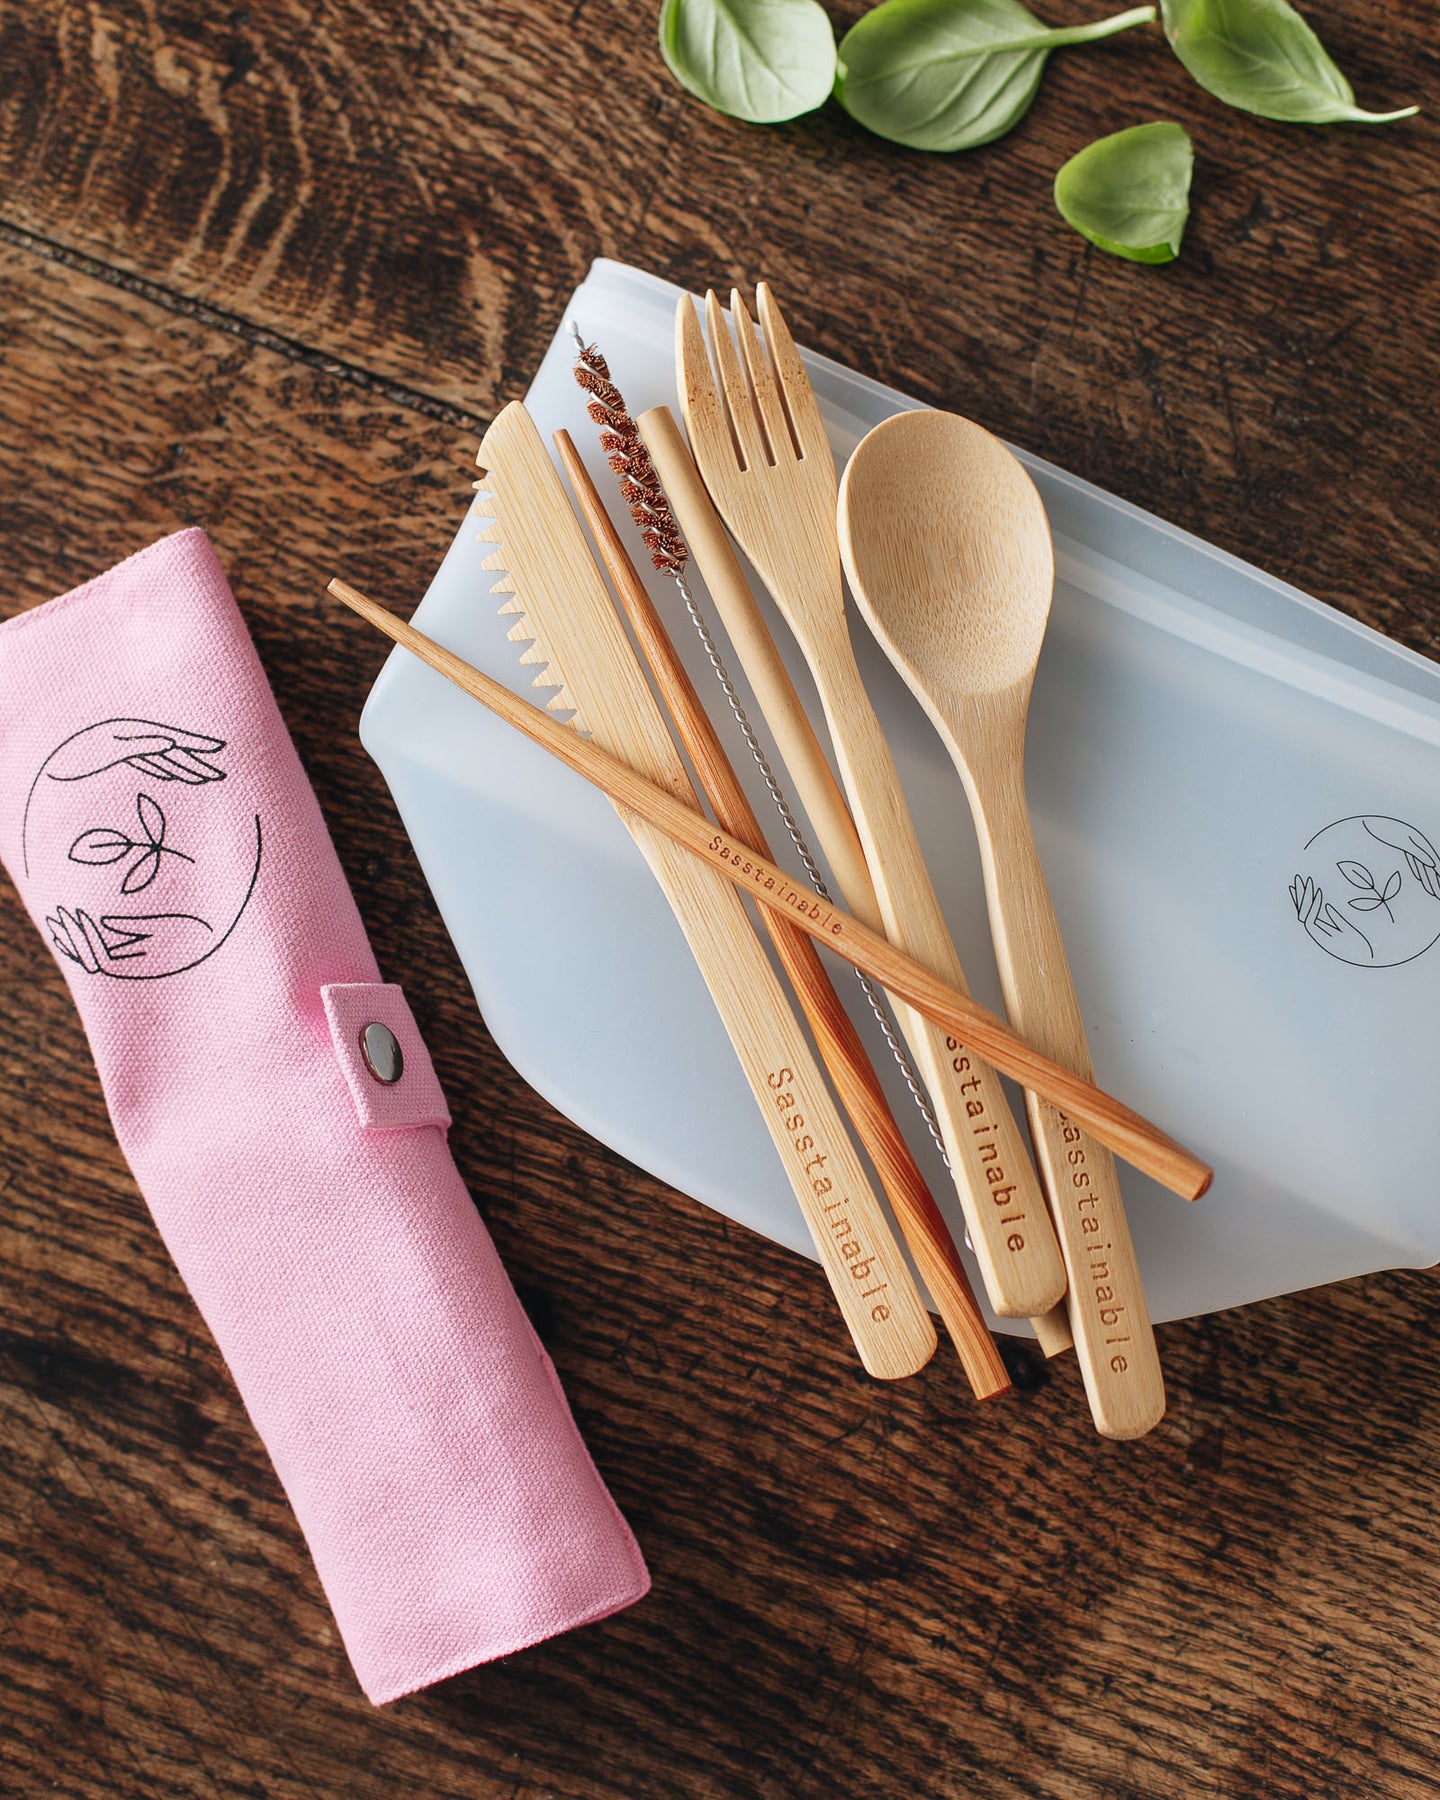 Bamboo cutlery, silicone pouch and pink cutlery case lying on a wooden surface